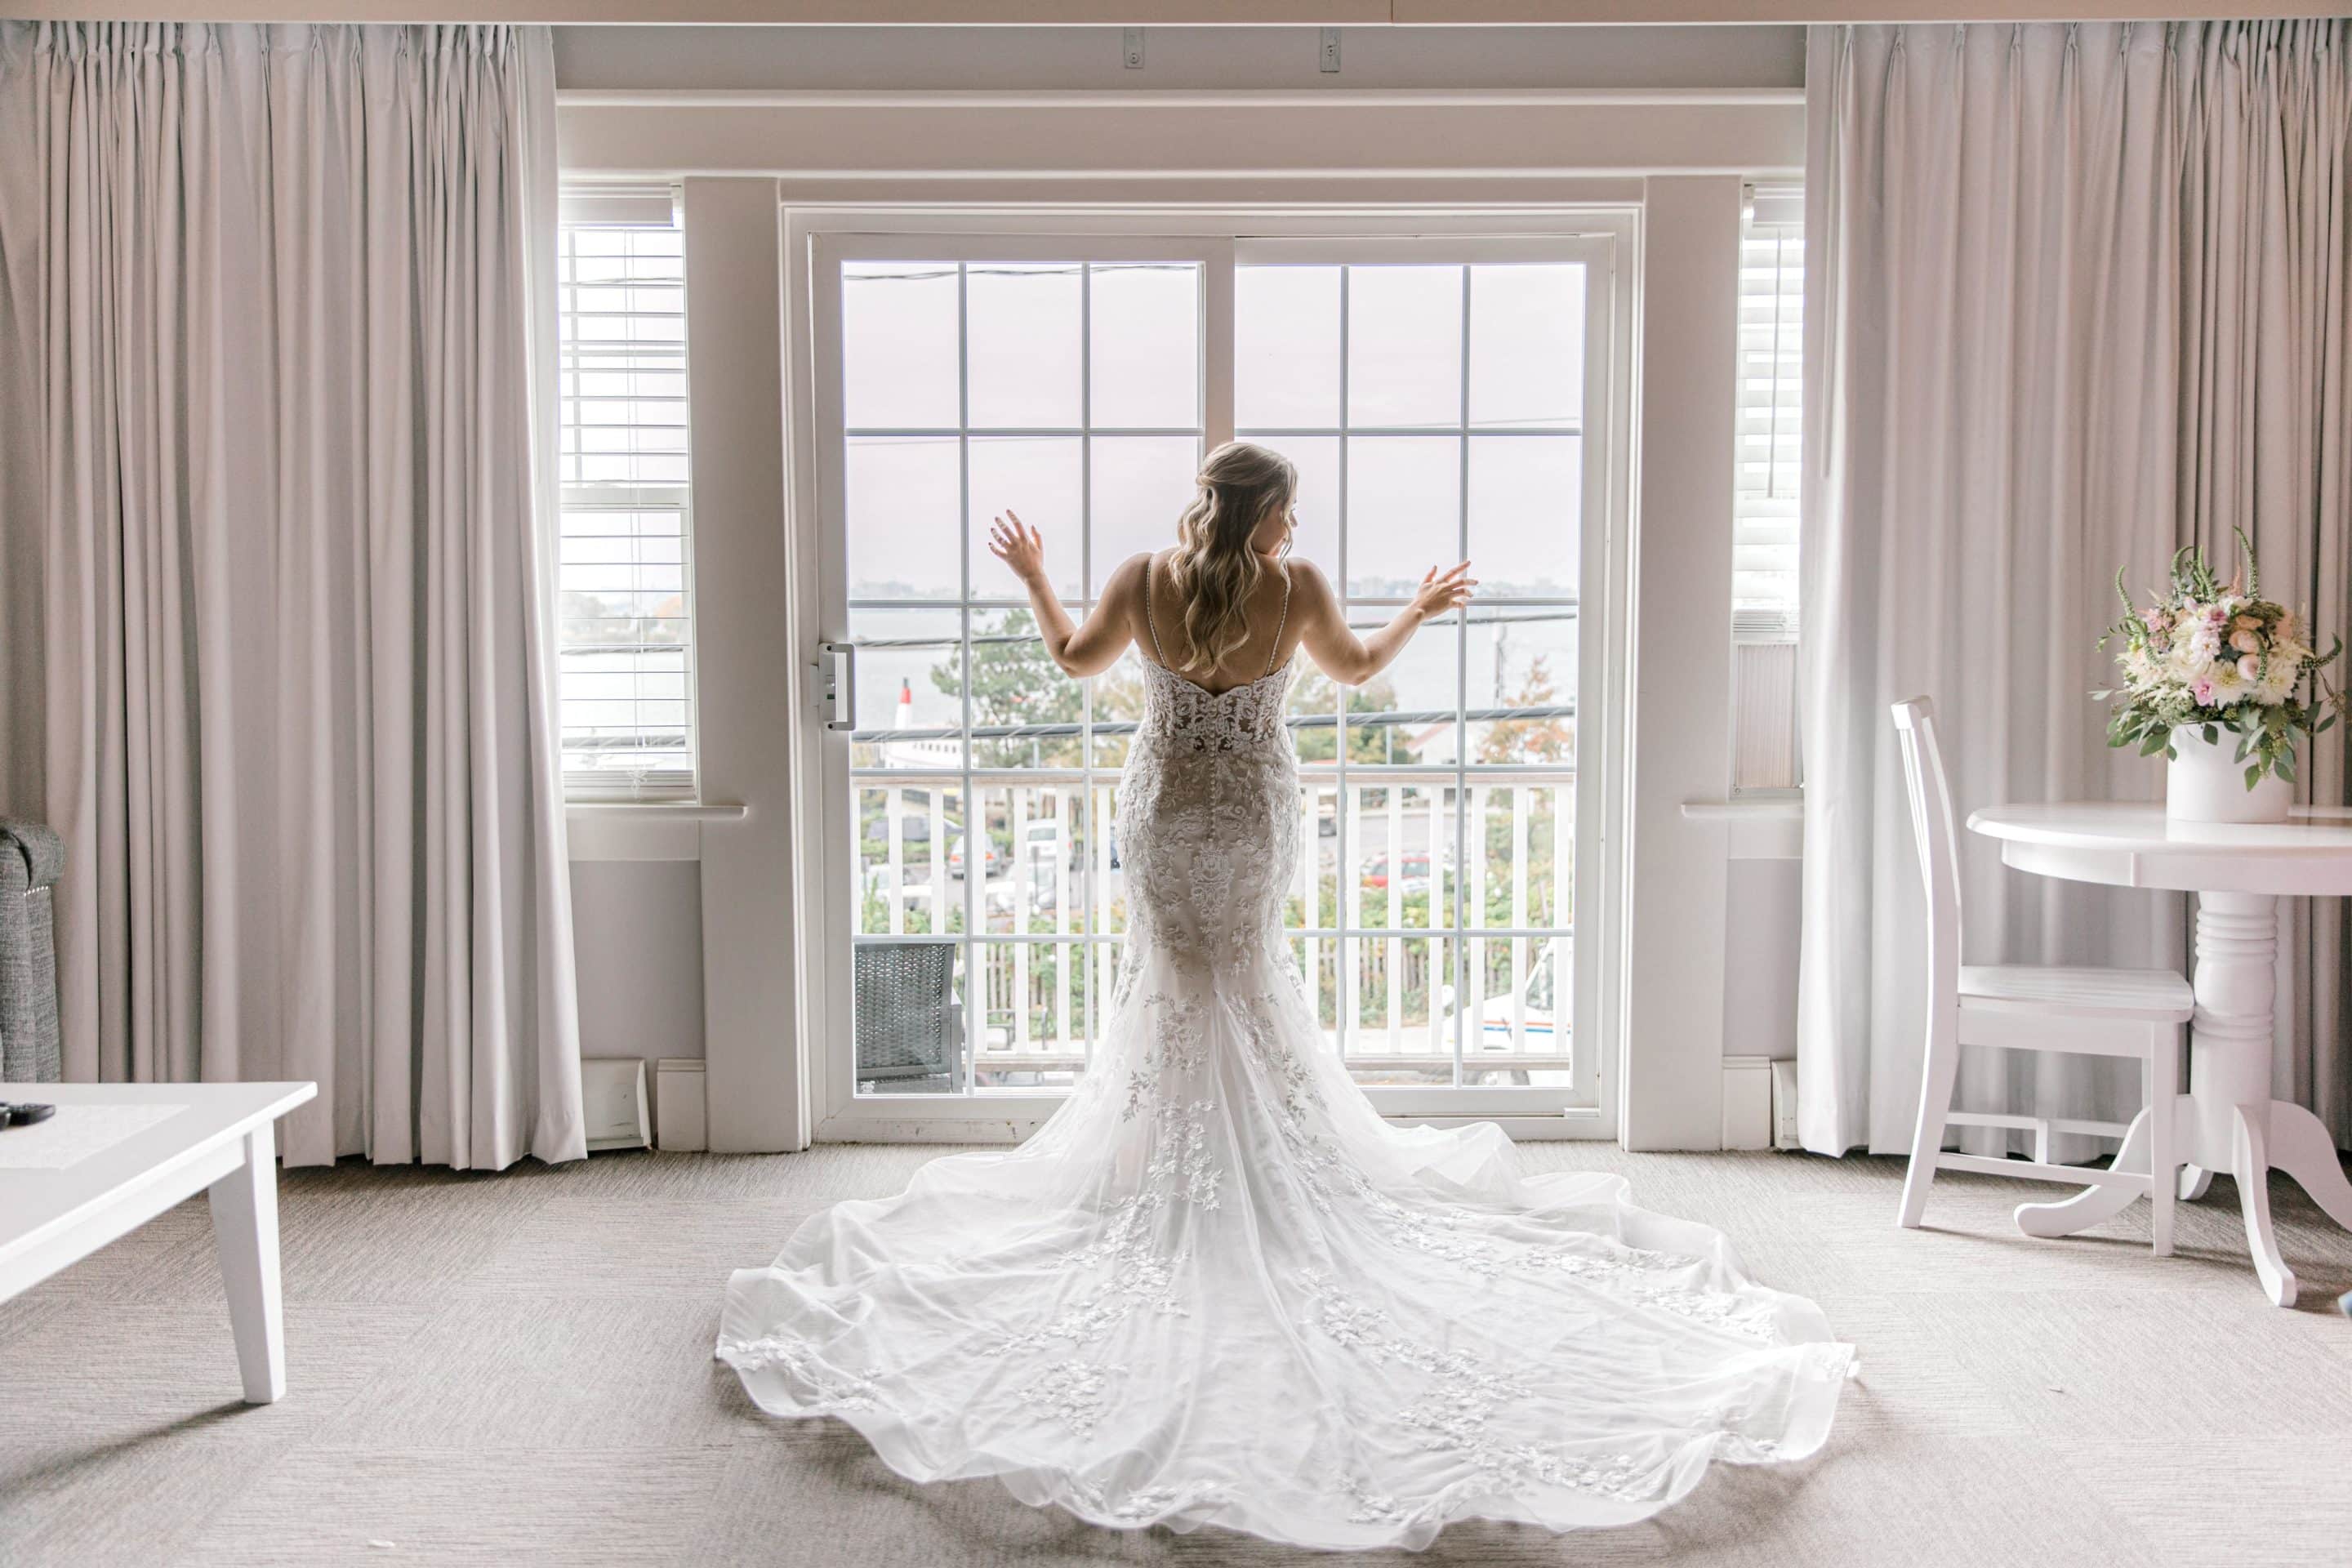 How much do wedding photographers cost in Maine?